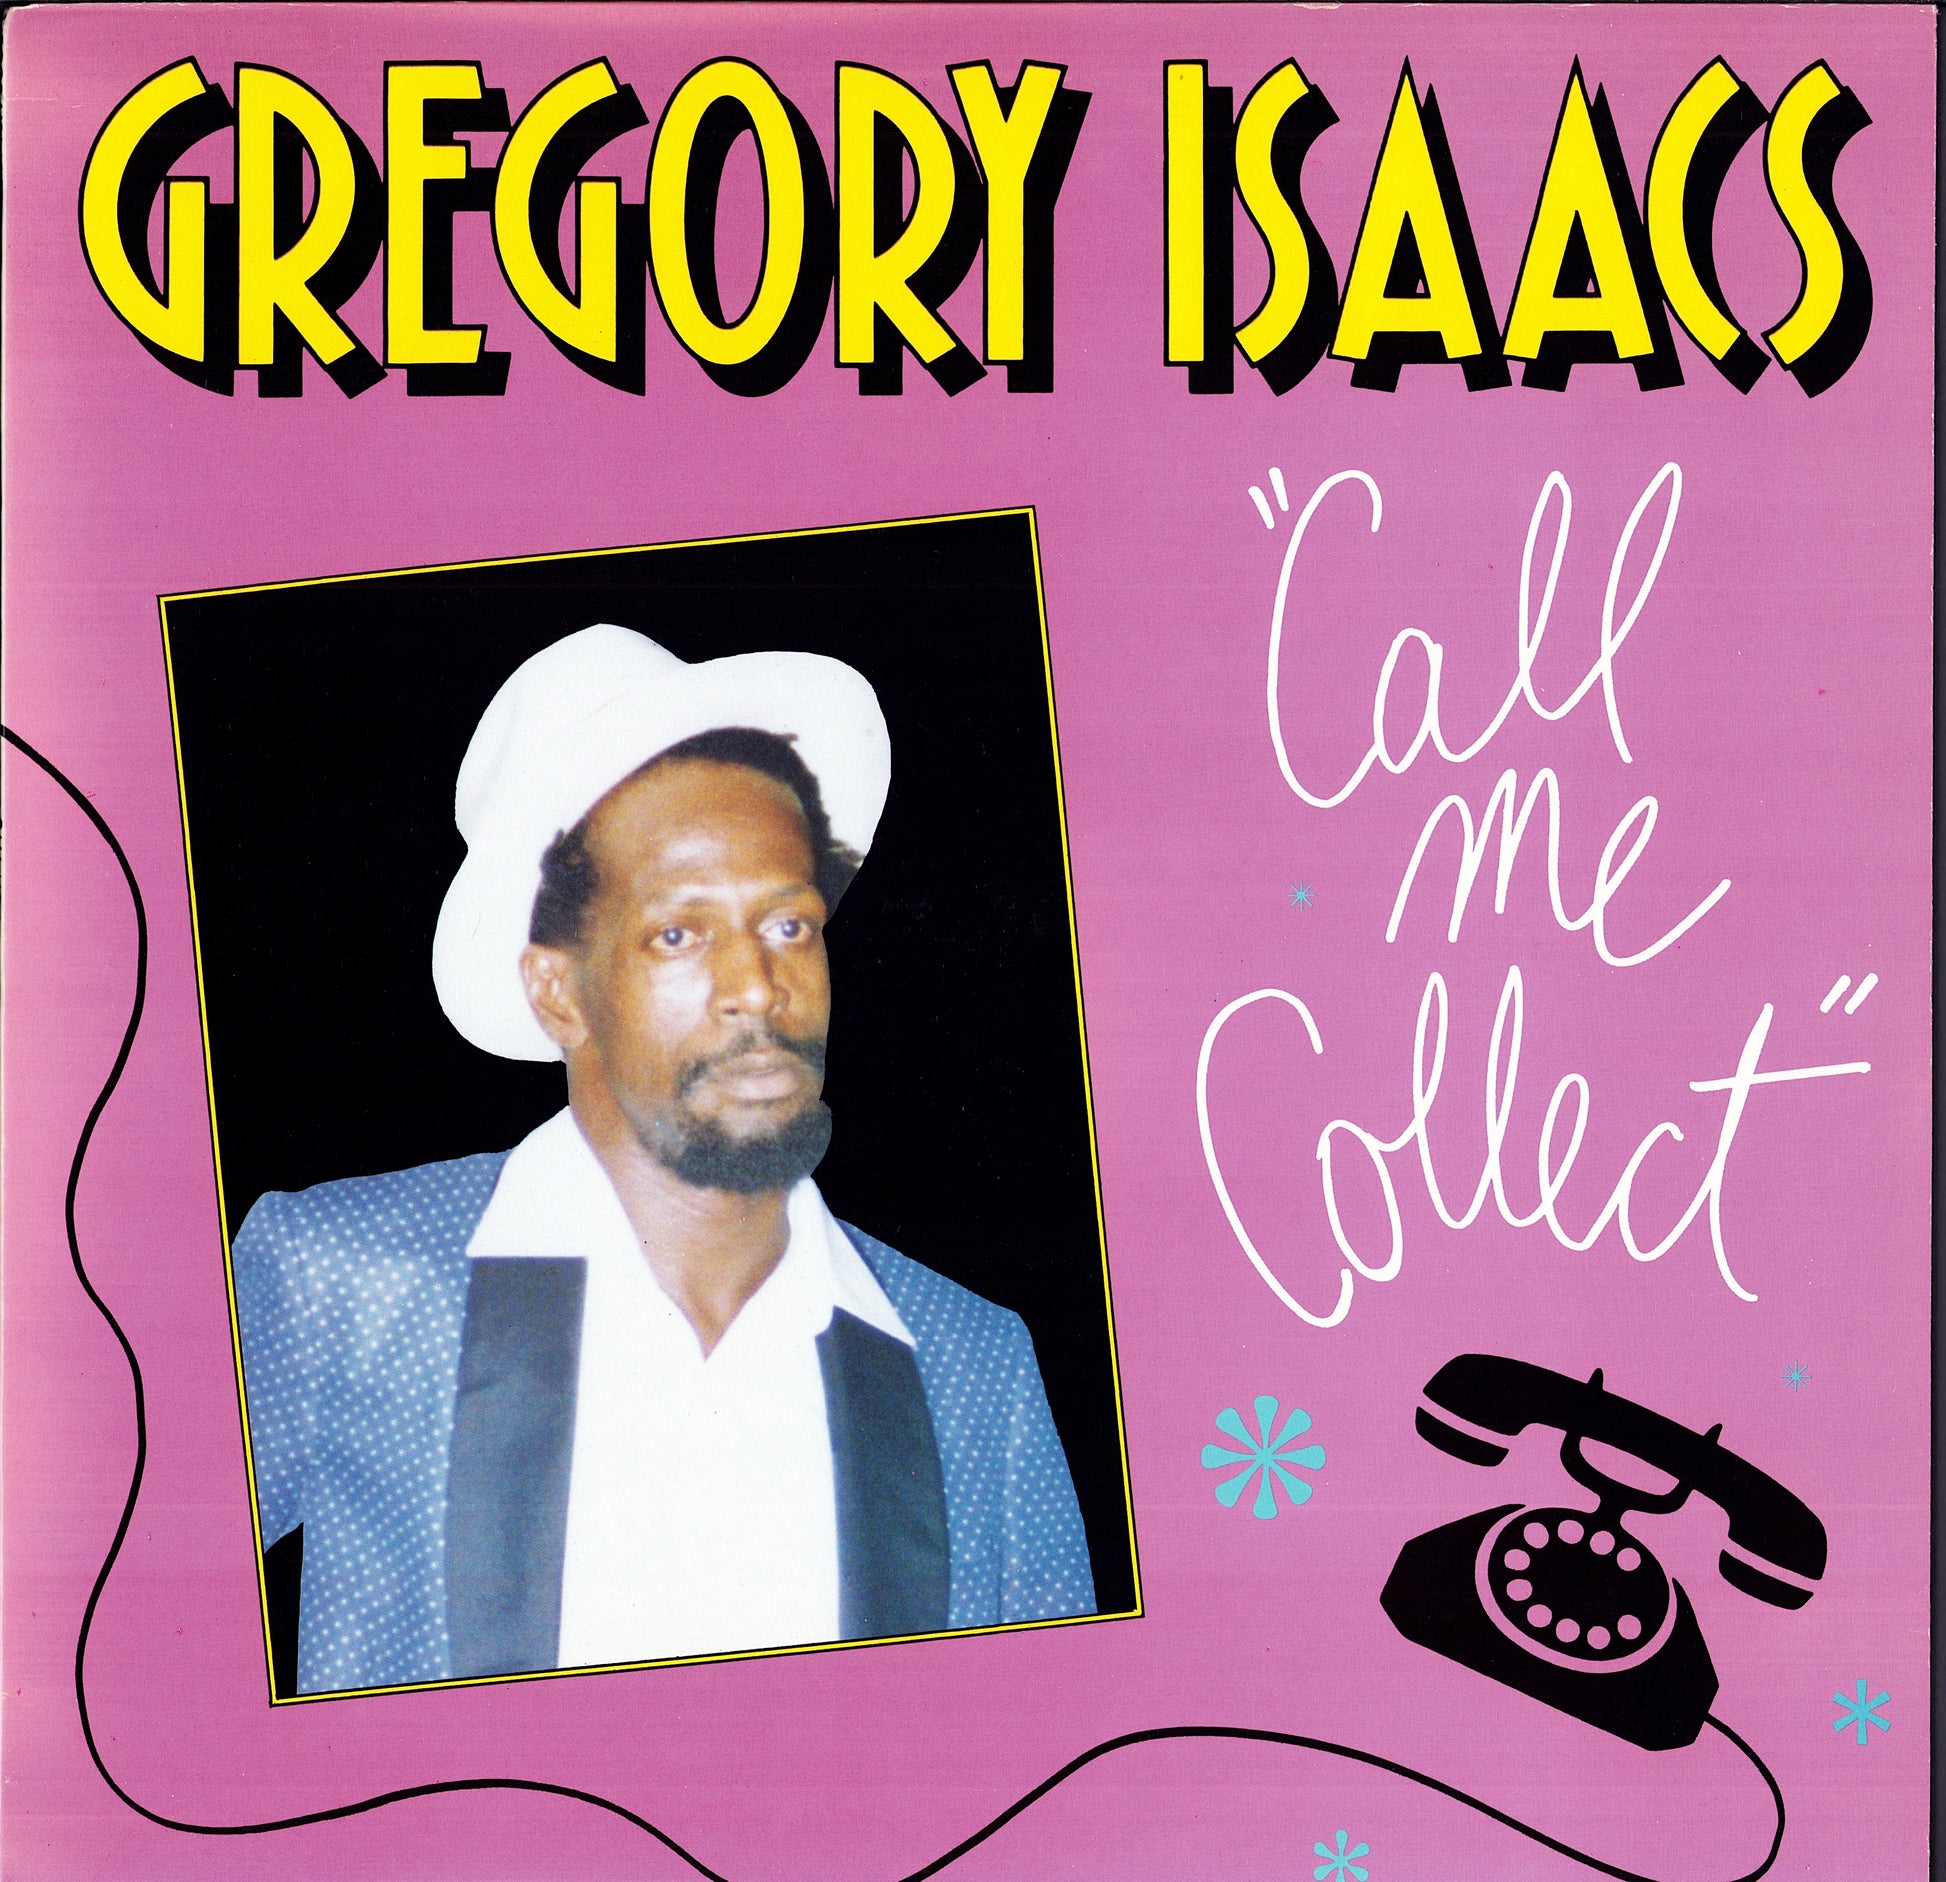 Gregory Isaacs - Call Me Collect Vinyl LP